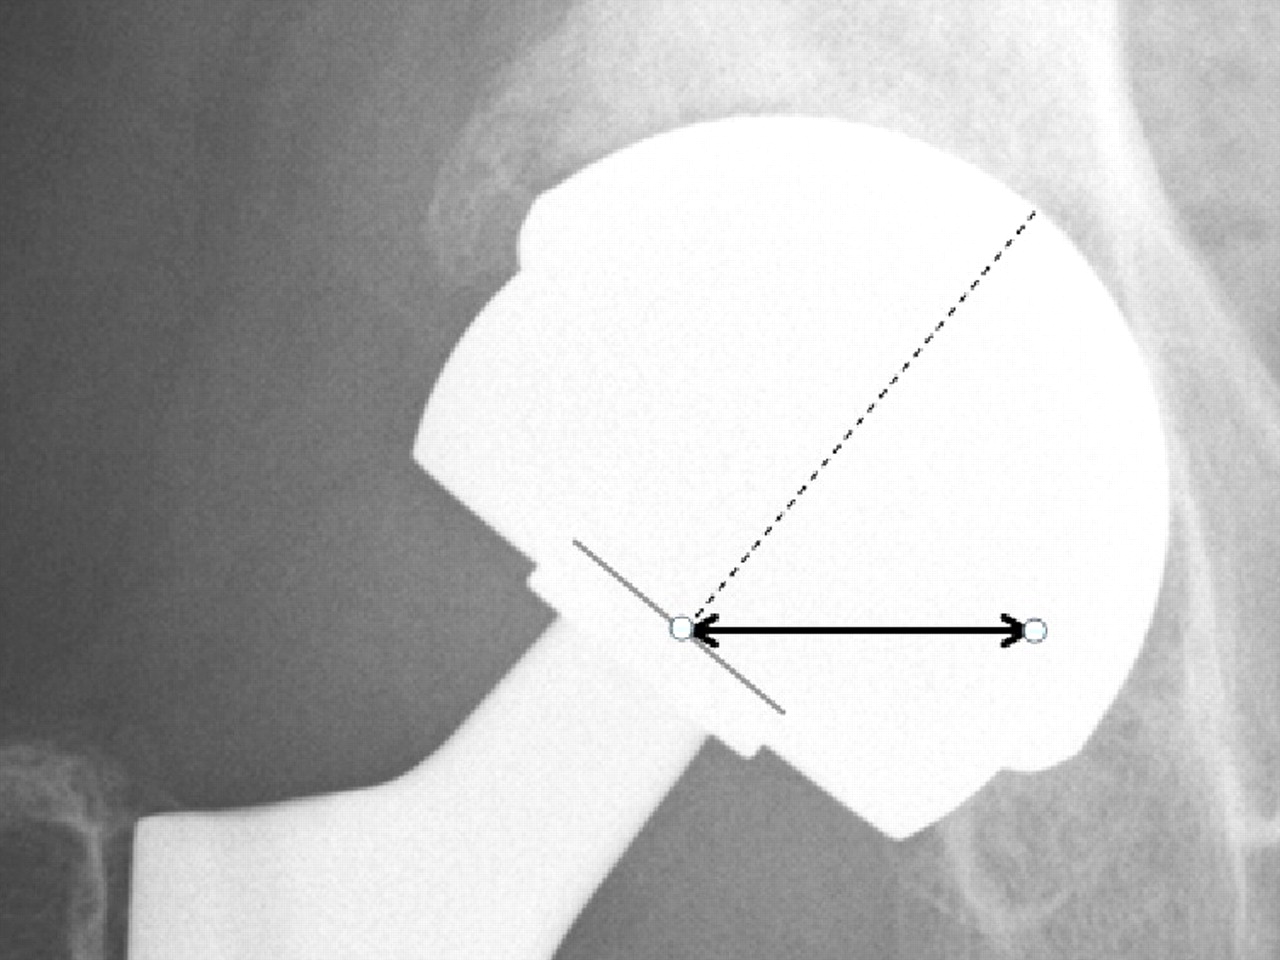 Fig. 3 
            Radiograph showing the measurement of
the horizontal lever arm (HLA) distance (bold black line). The HLA
is the horizontal distance (in mm) from a line through the axis
of the neck to the tip of the bearing surface (broken line) and
the centre of the taper engagement level.
          